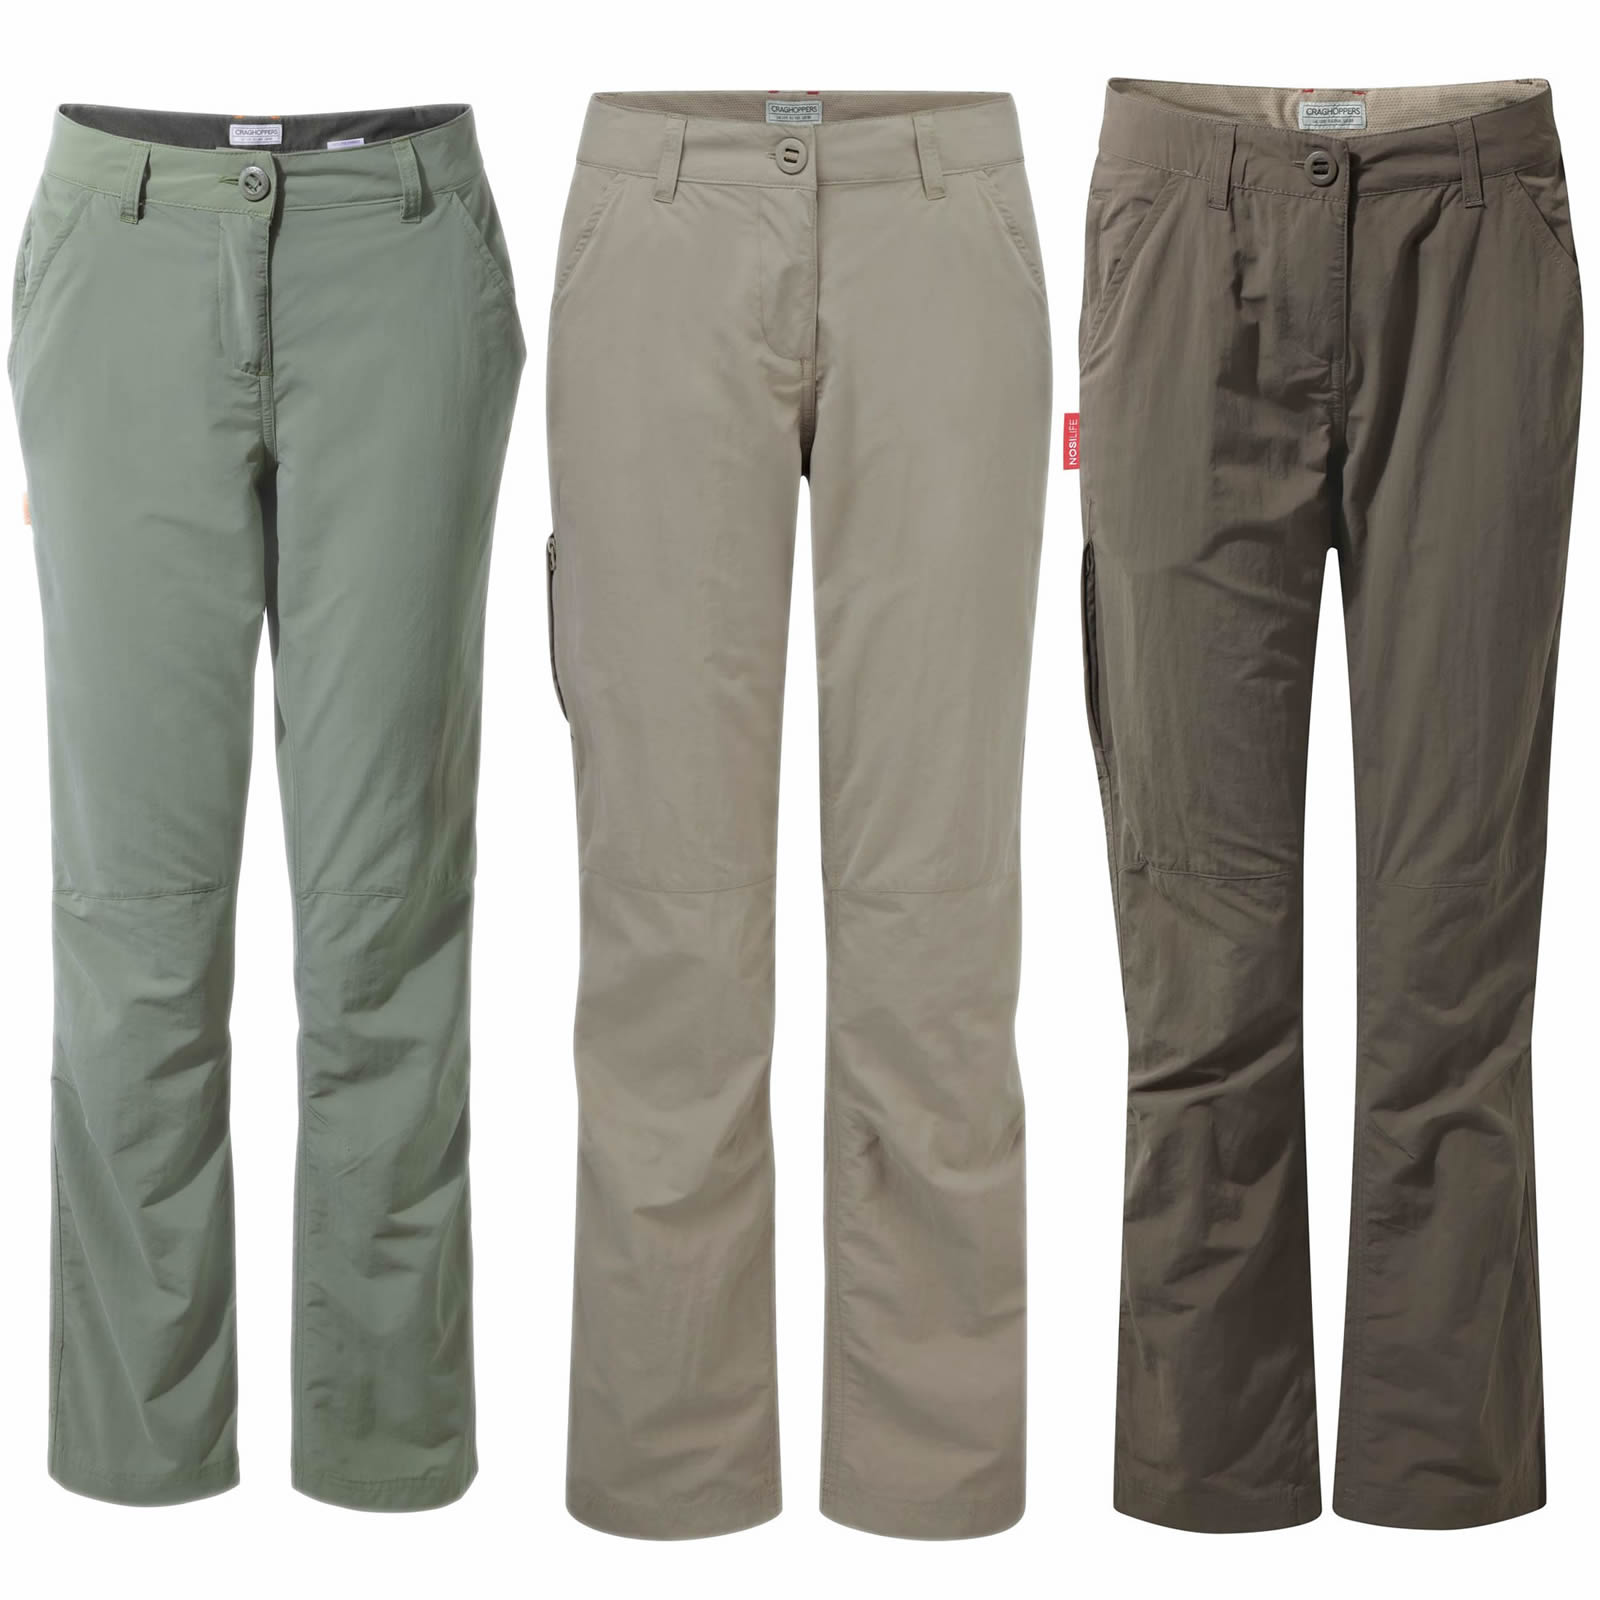 Craghoppers Womens Kiwi Lined Trousers